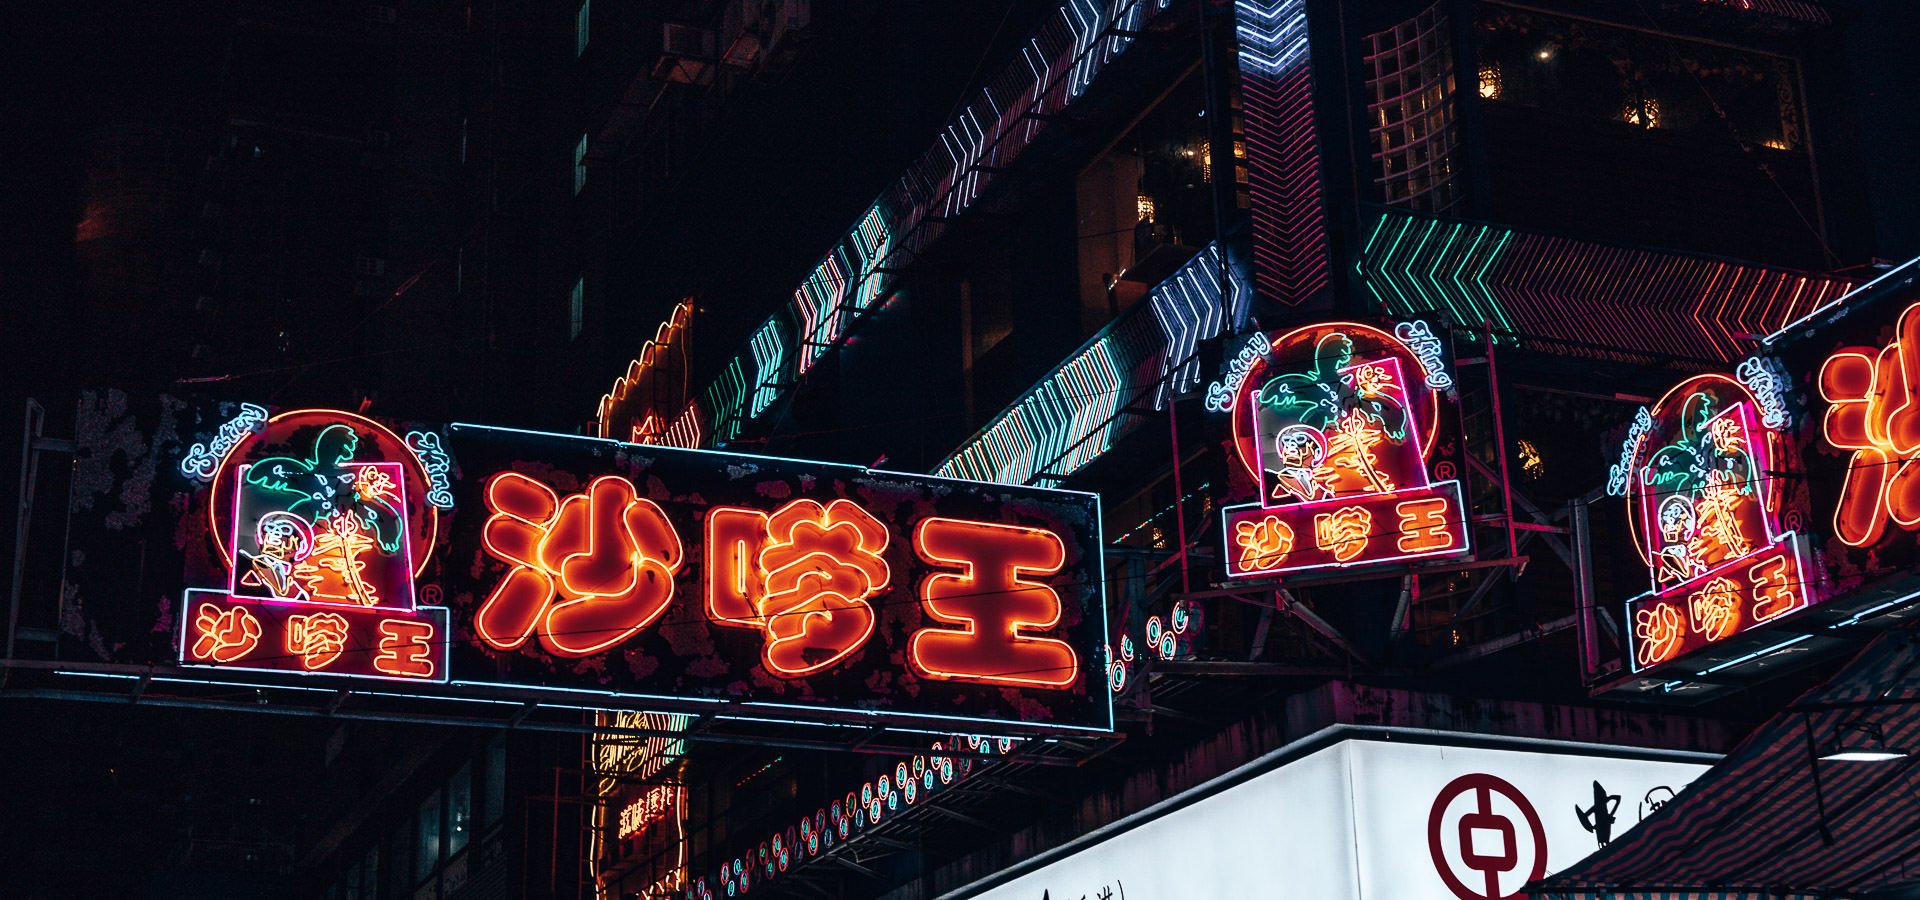 Under Neon Lights In Mong Kok, Hong Kong | island hopping in the philippines 2